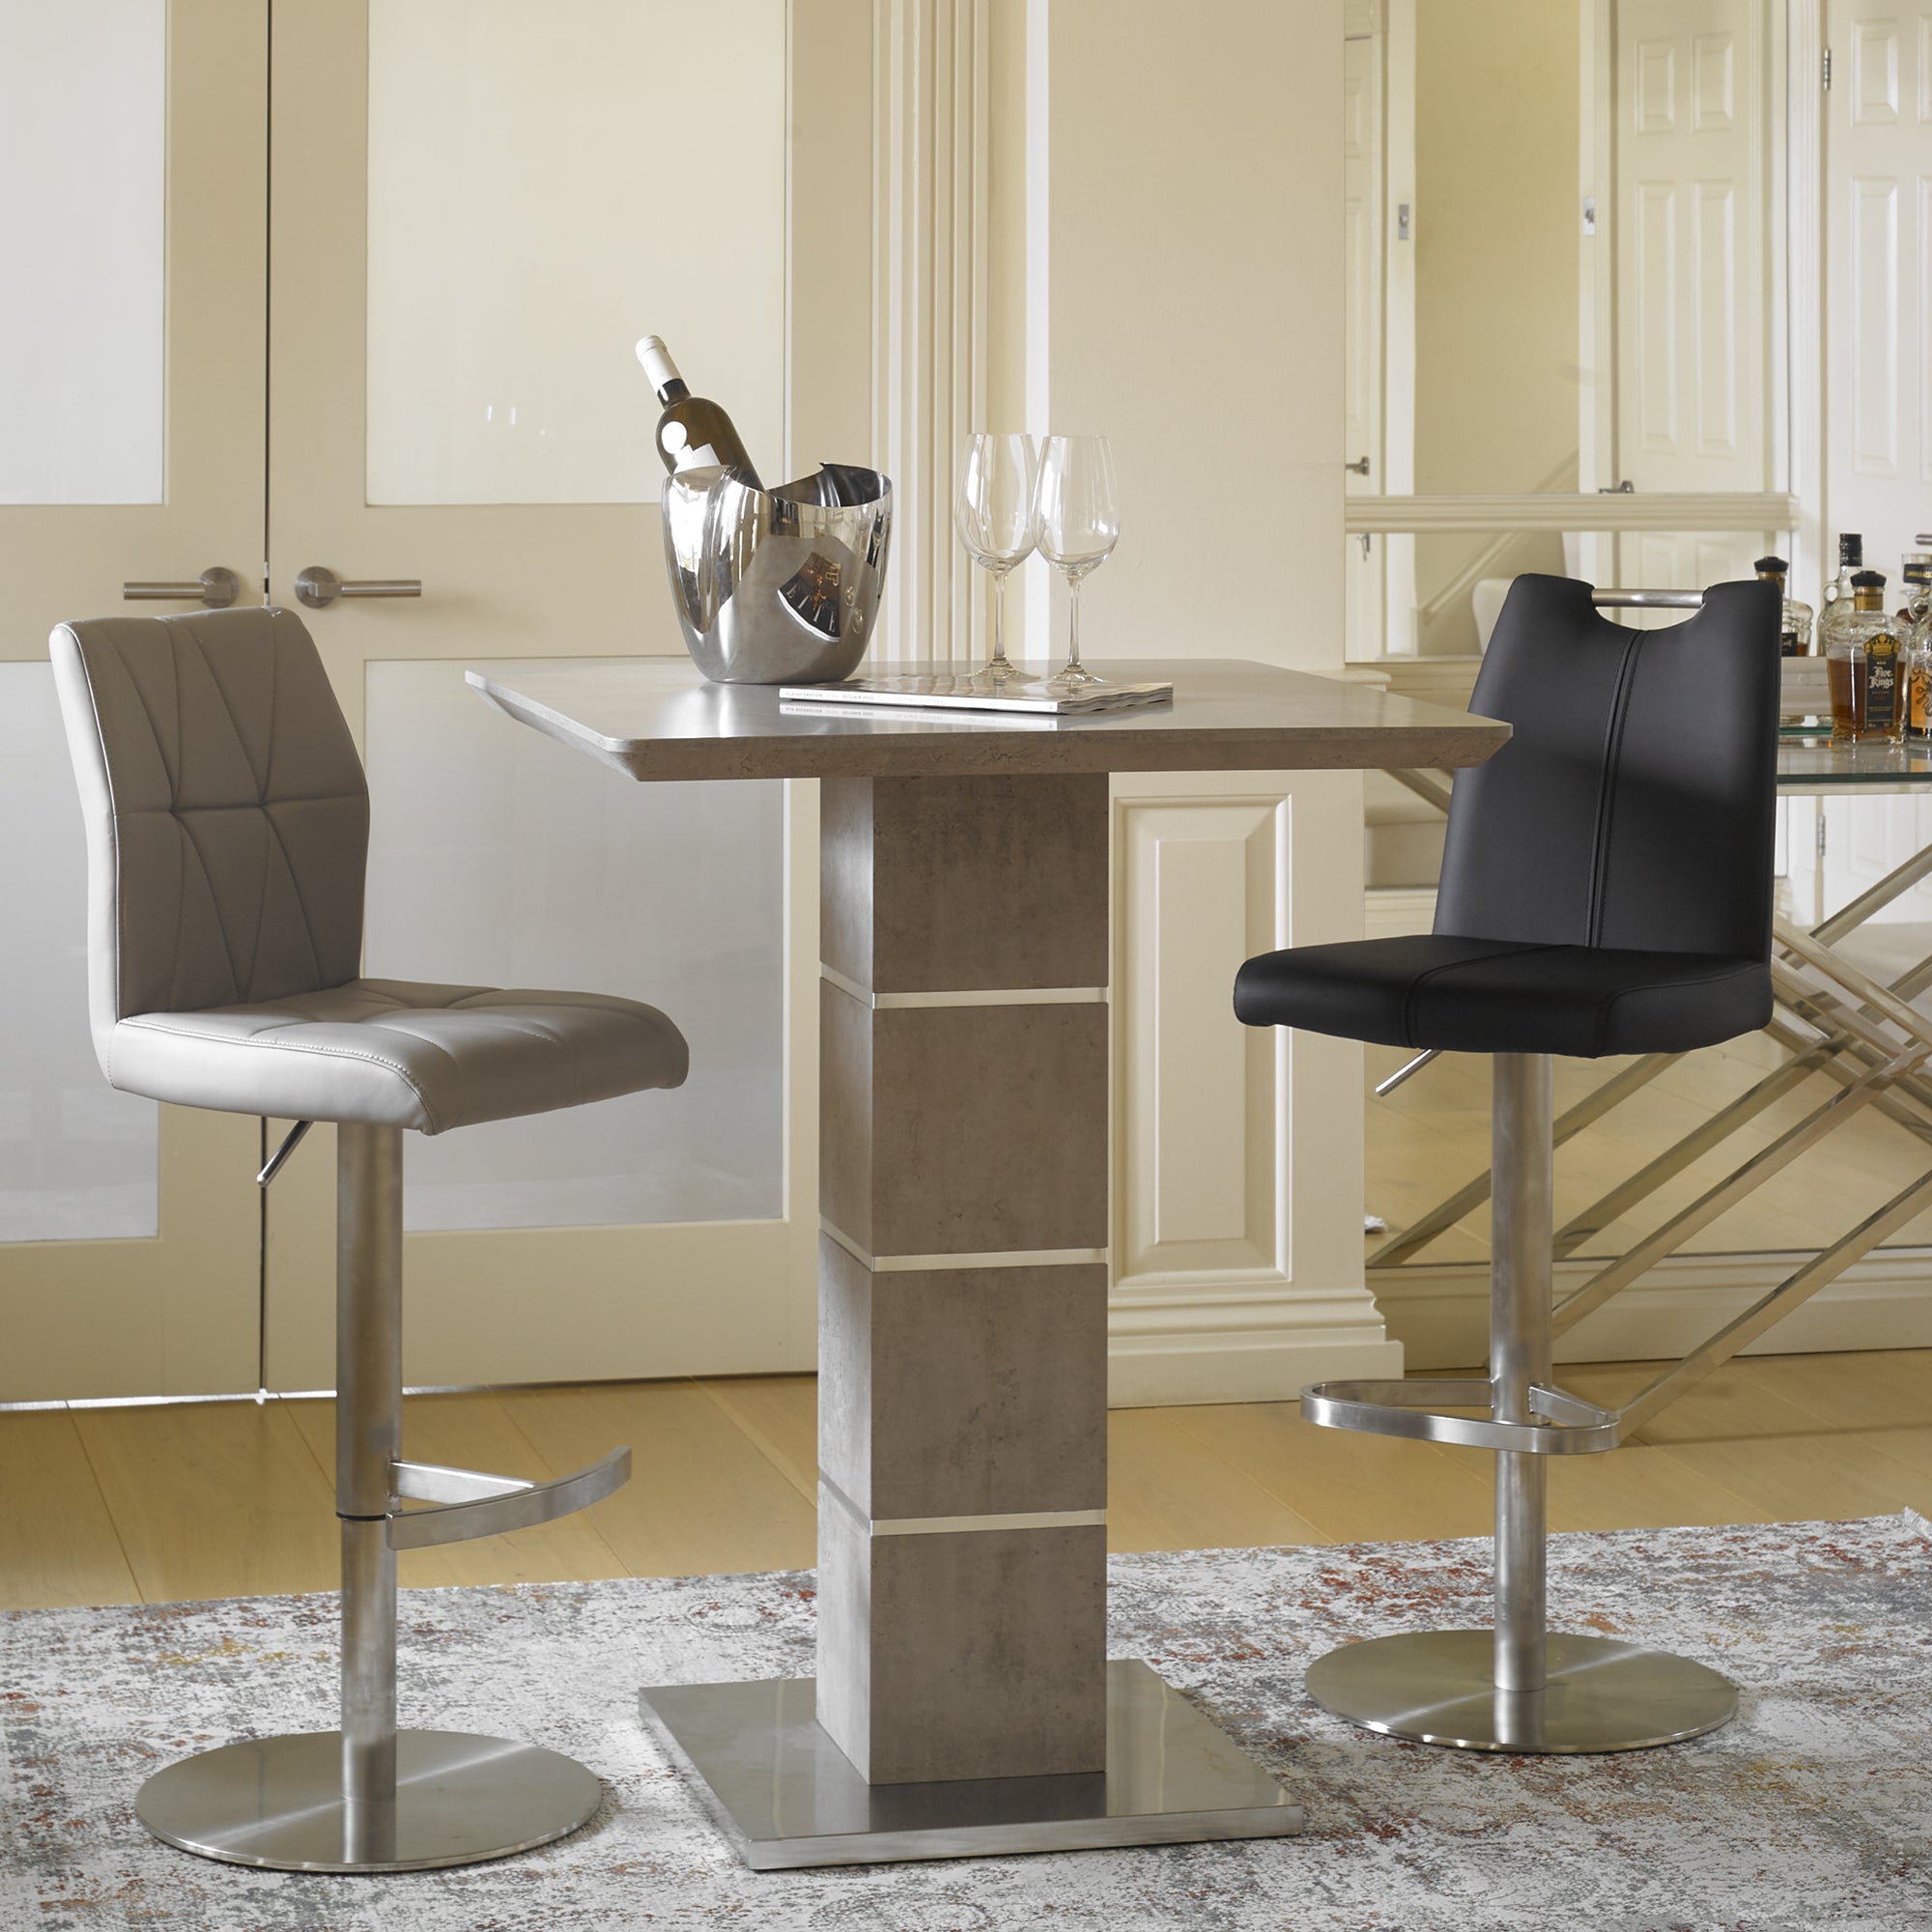 Light Grey PU Bar Stool (Assembly Required)